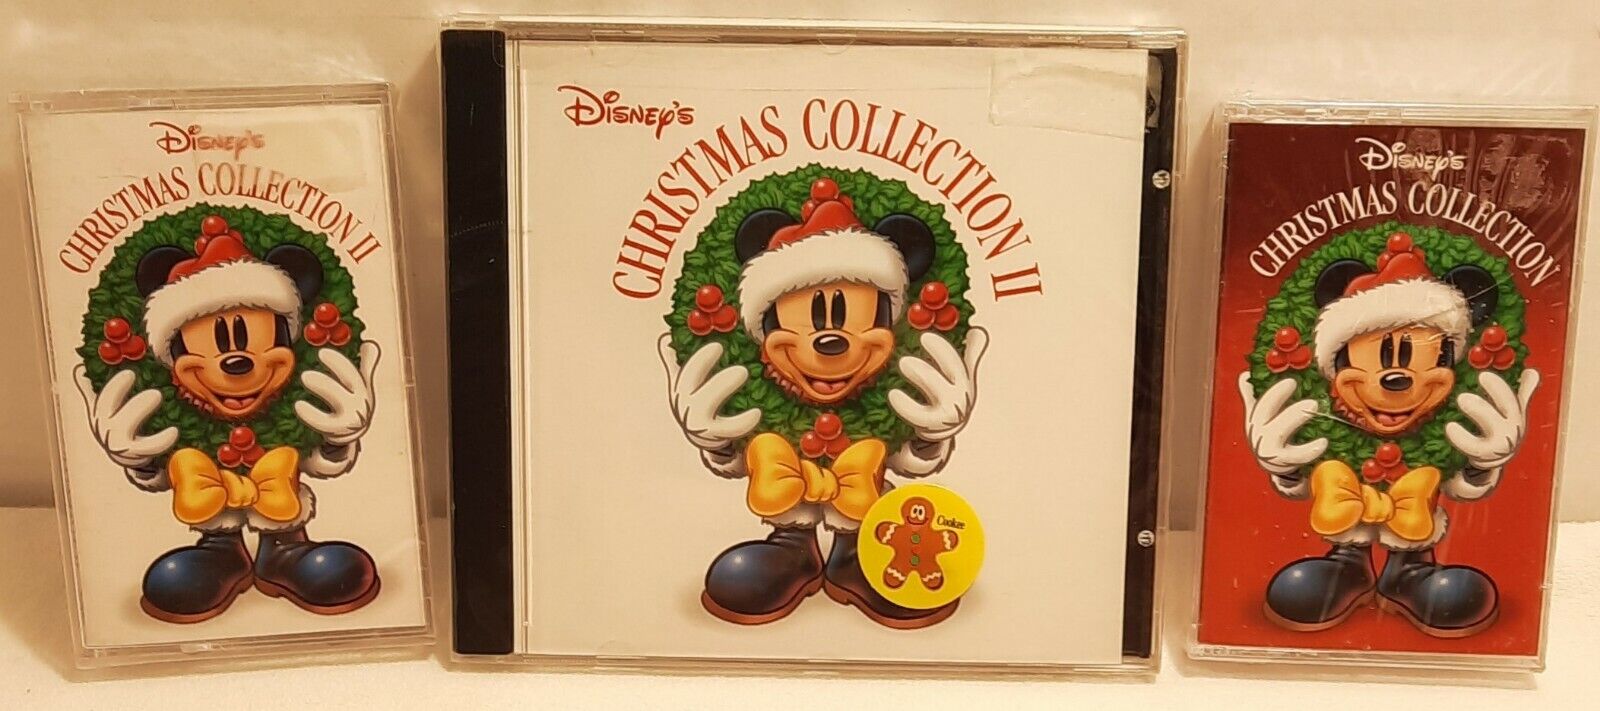 VTG Disney’s Christmas Collection LOT of 2 cassettes 1 & 2+ FREE CD *NEW SEALED*